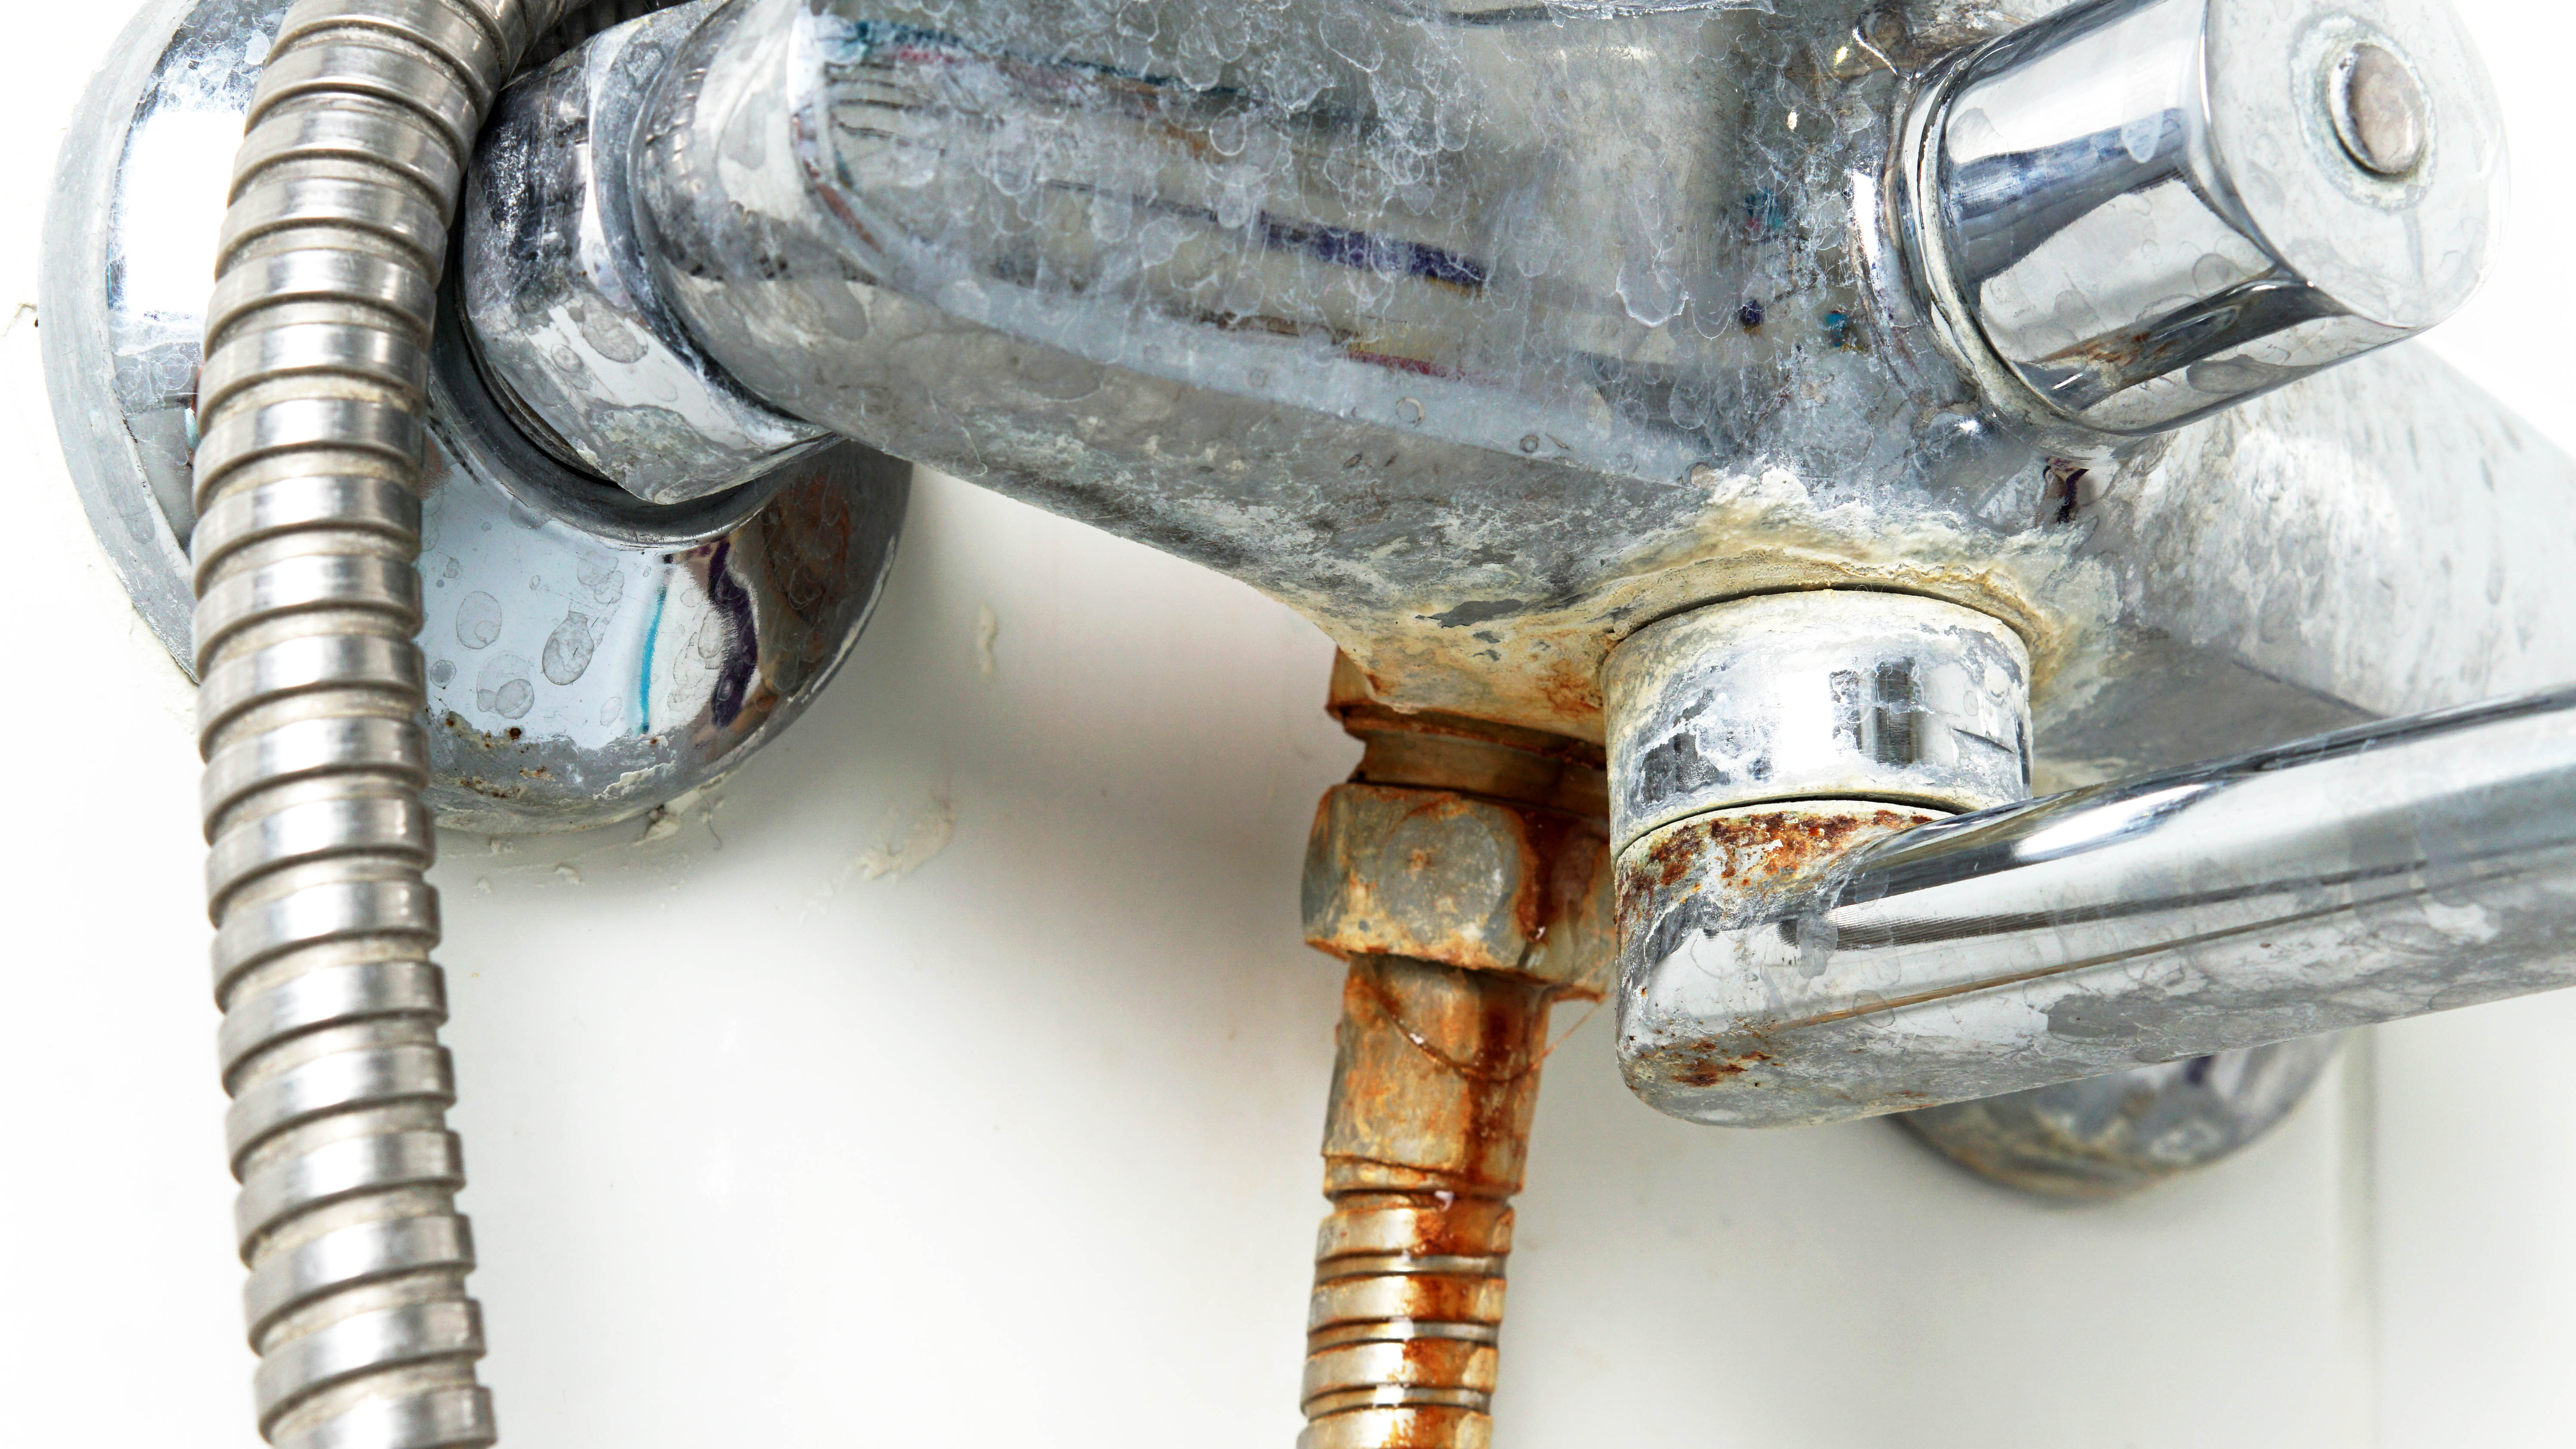 7 ways to prevent limescale in your shower